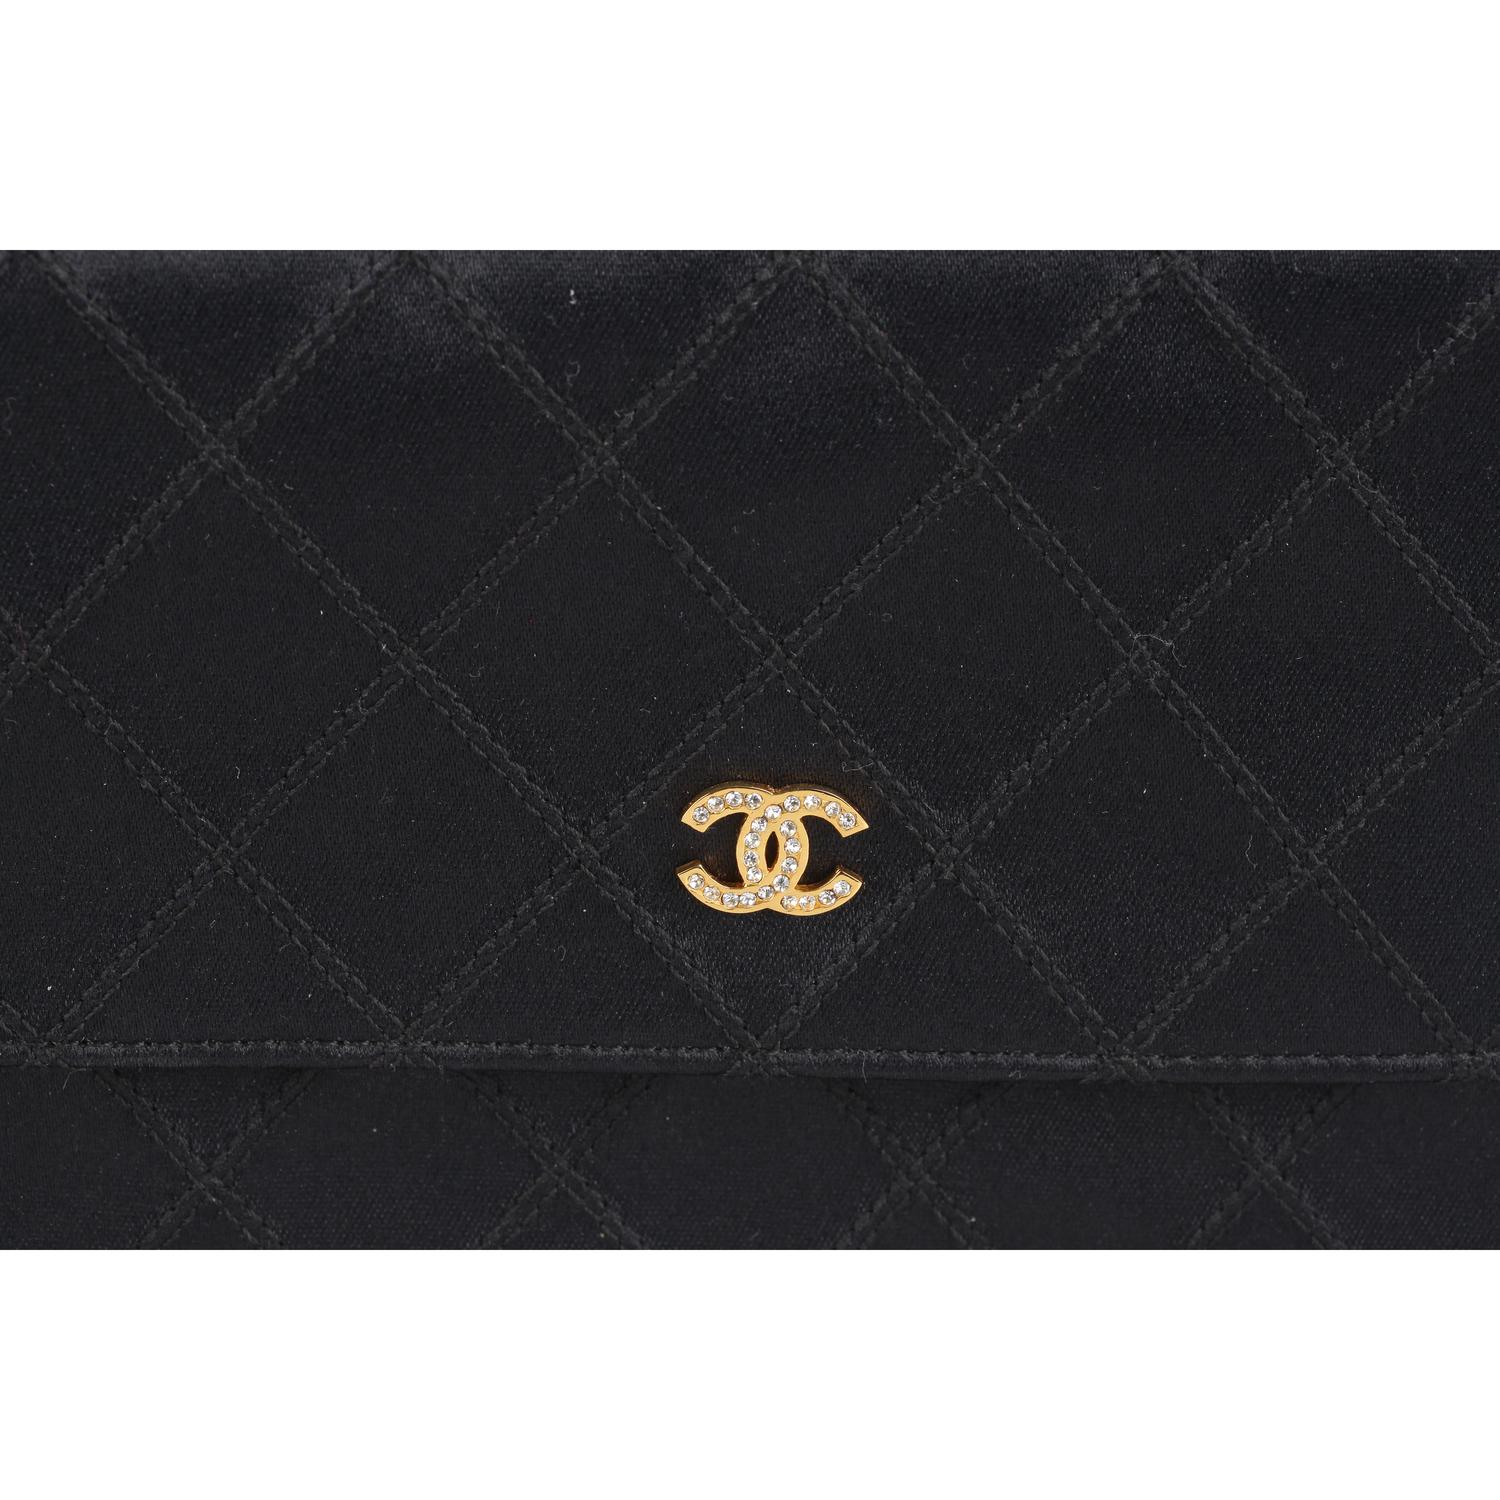 Vintage Chanel black quilted satin small clutch from the late 80s - early 90s. Flap with button closure. Gold metal CC - CHANEL logo on the front embellished with rhinestones. 1 open pocket on the back. Leather and gros-grain lining interior. 1 side